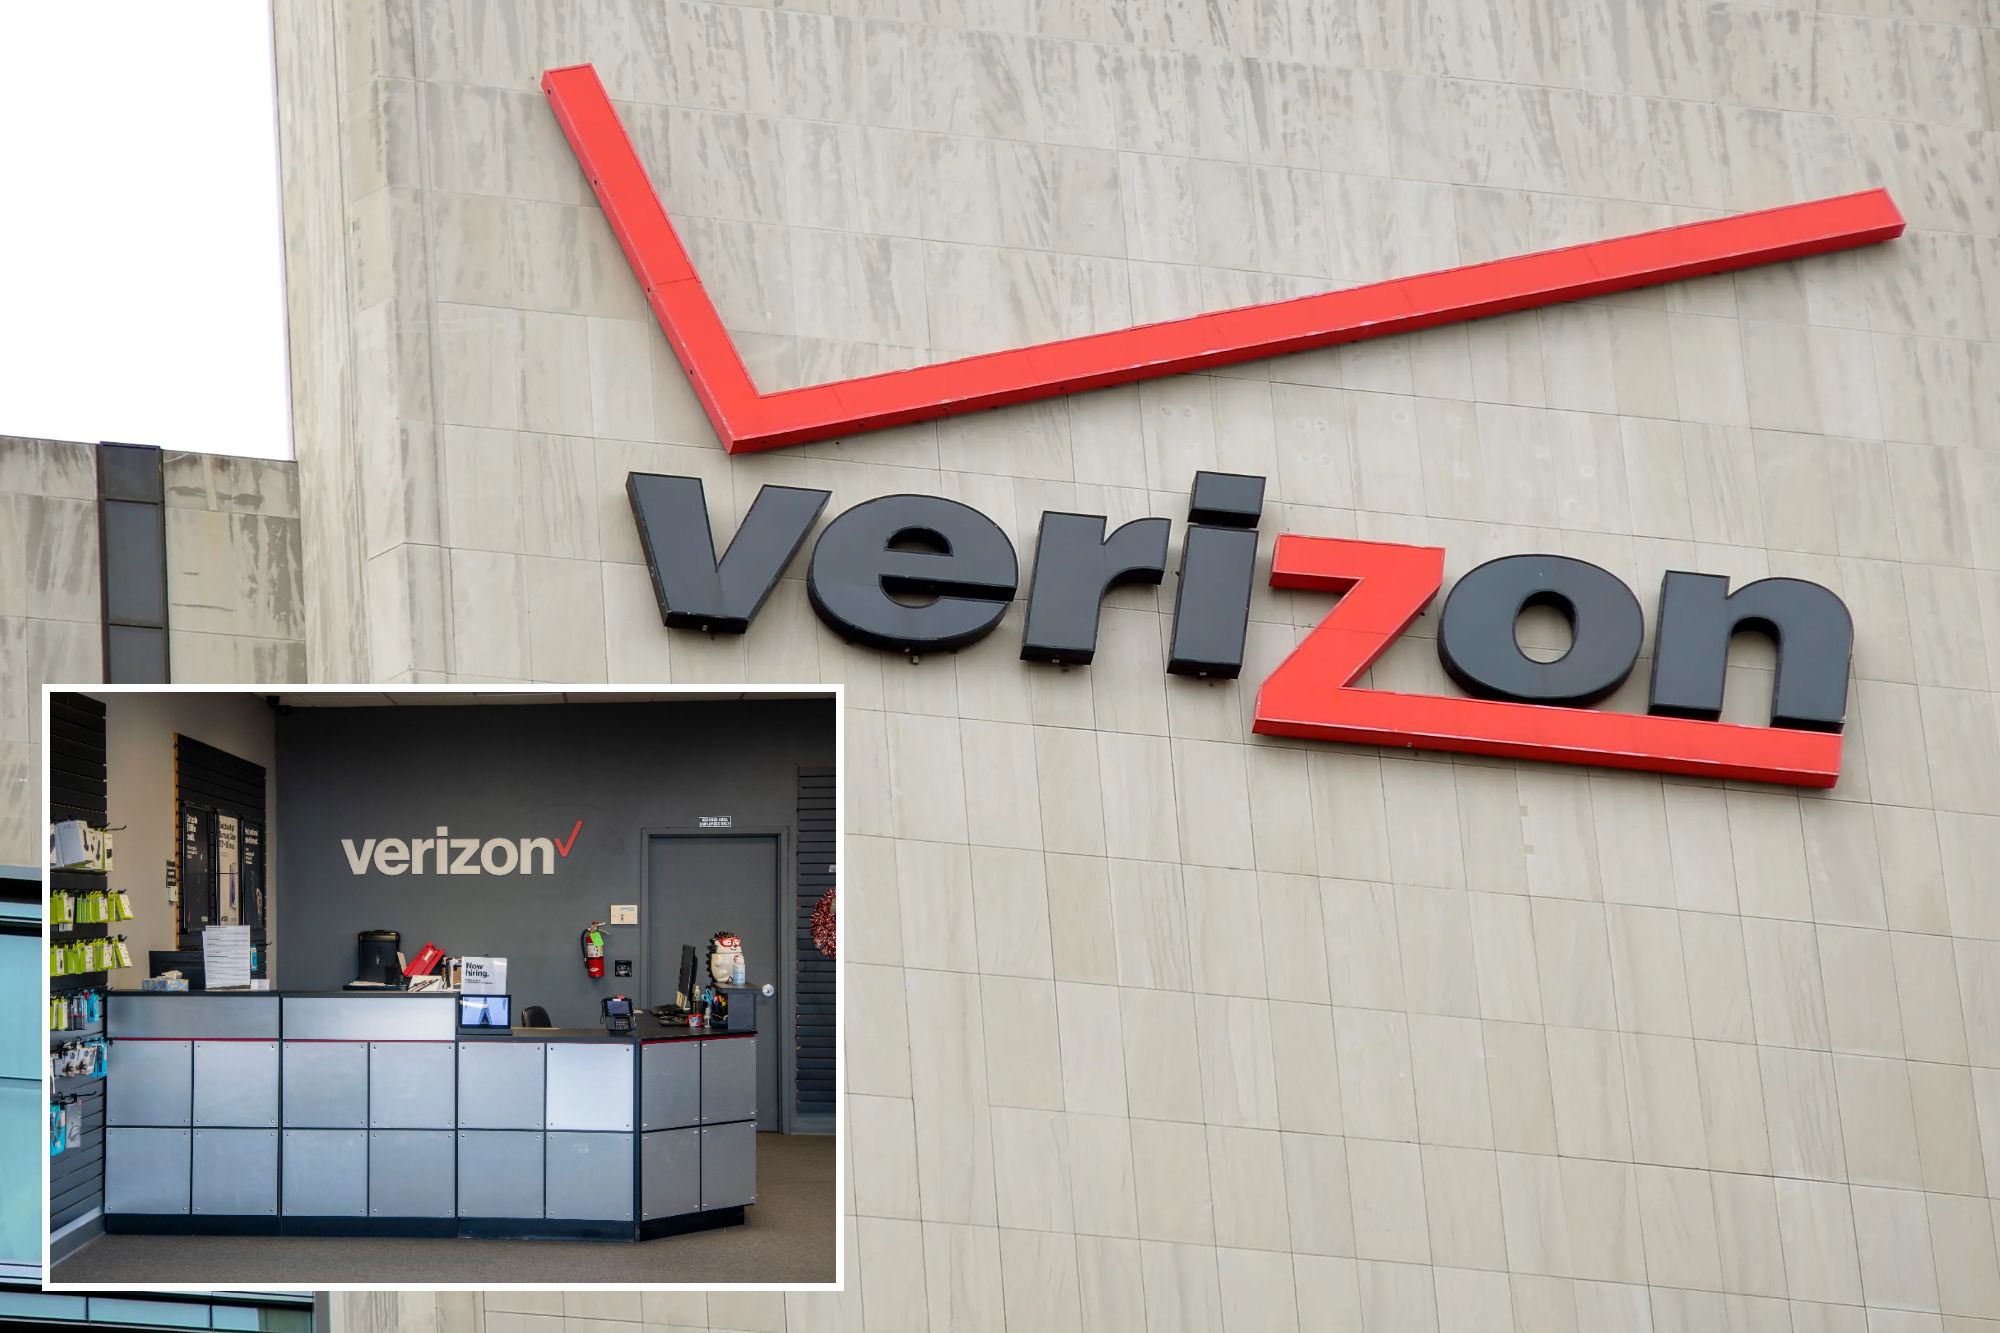 How to get a slice of Verizon’s 100M classaction settlement